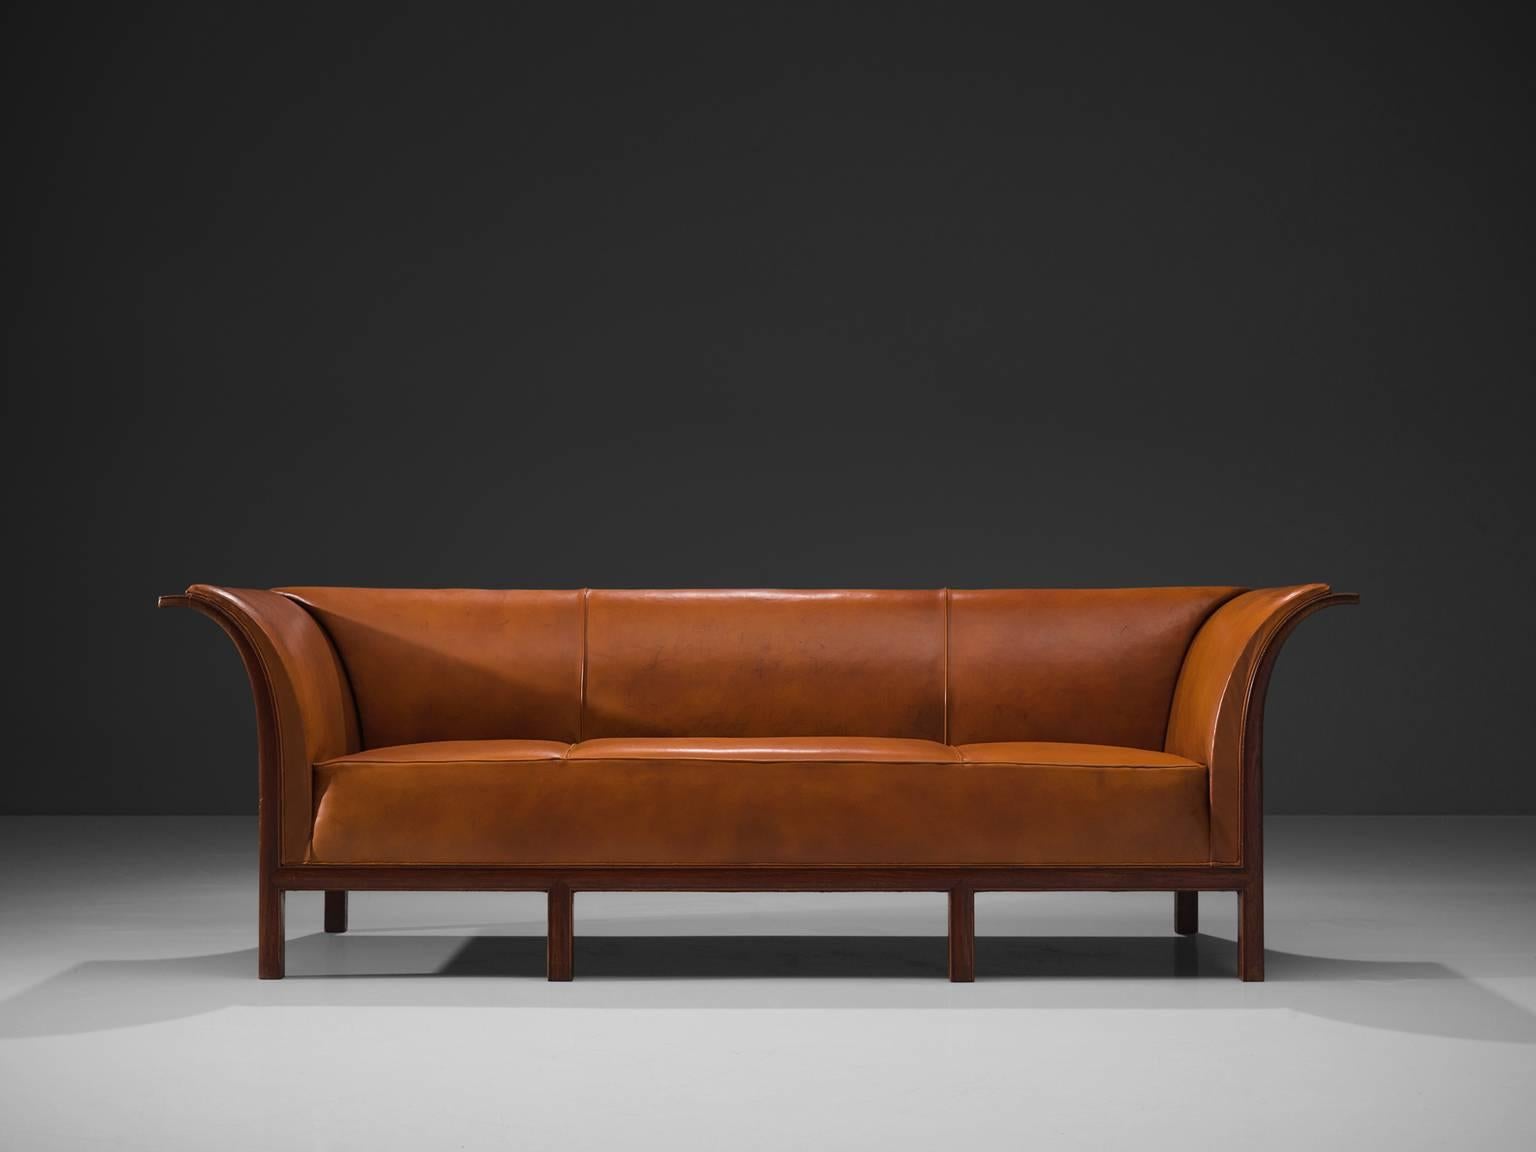 Frits Henningsen, sofa in teak and cognac leather, Denmark, 1930s.

This classic sofa was designed and produced by master cabinet maker Frits Henningsen, circa 1930s. The basic design is well balanced, showing an interesting contrast between the